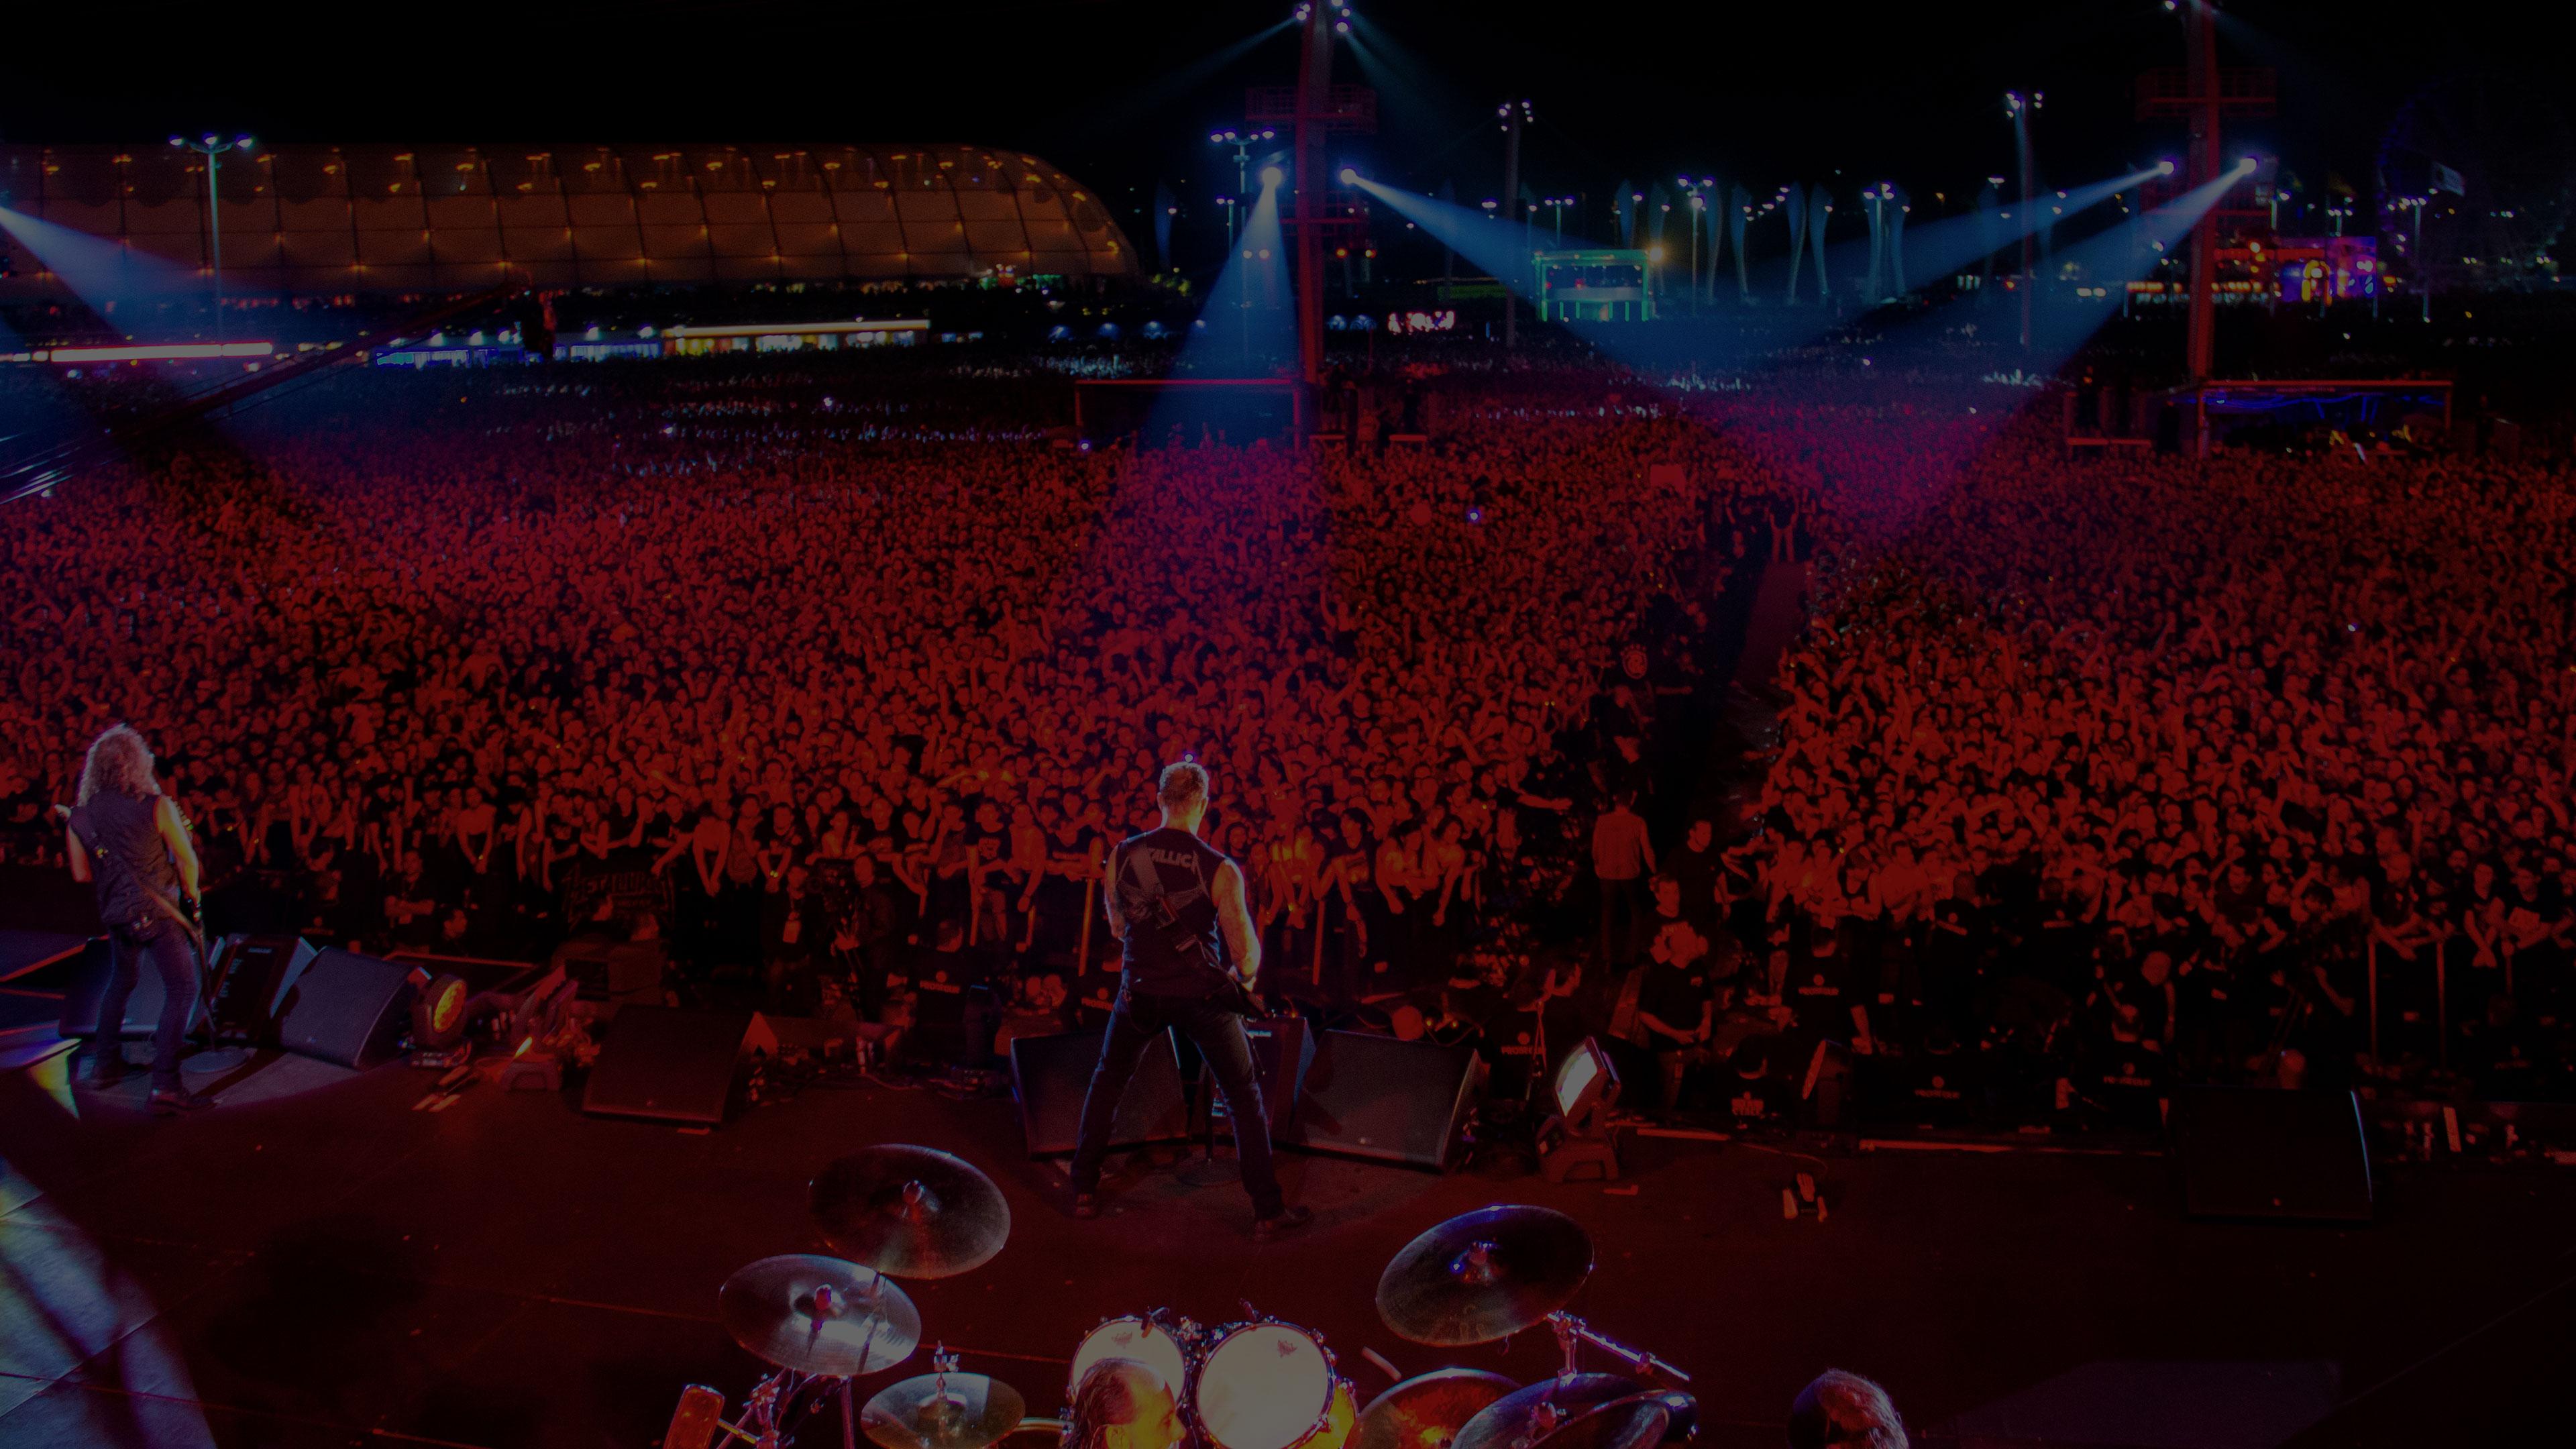 Banner Image for the photo gallery from the gig in Rio de Janeiro, Brazil shot on September 19, 2013